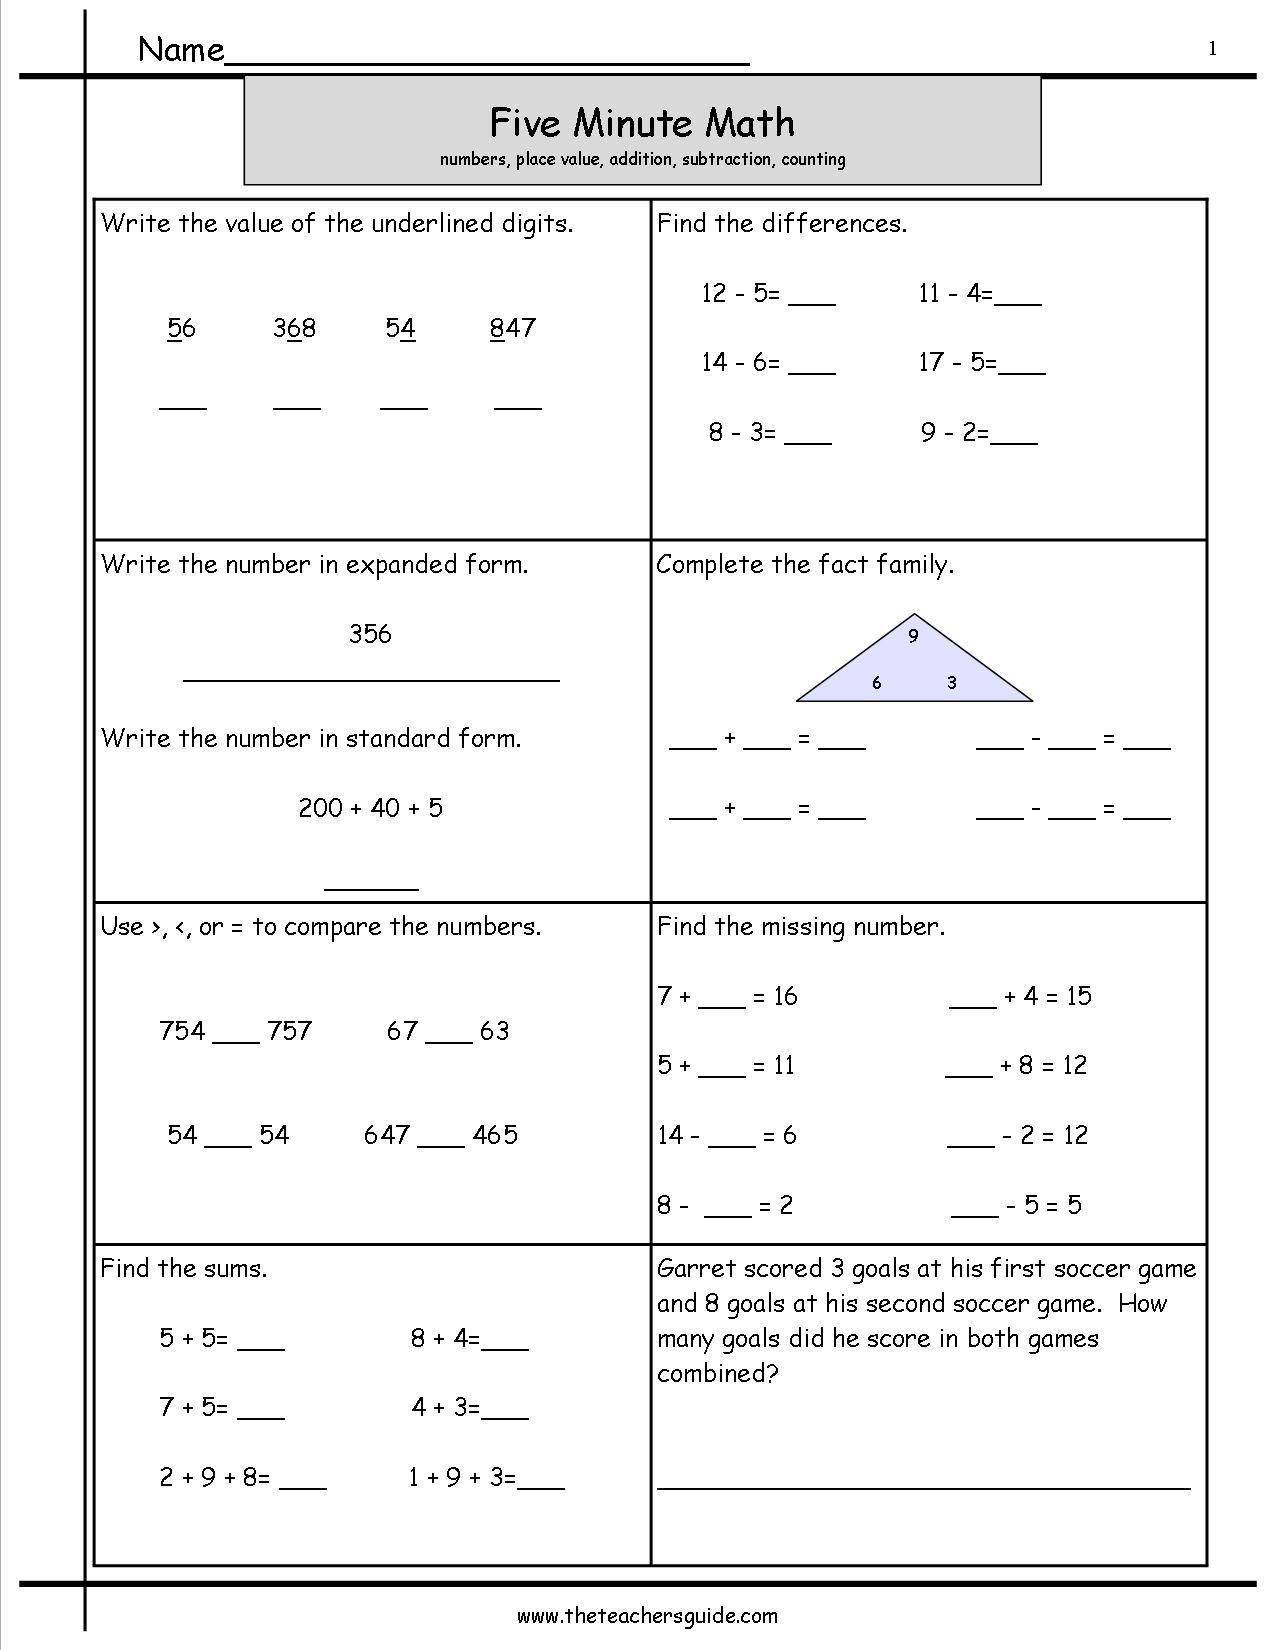 Five Minute Math Review Worksheets From The Teacher s Guide